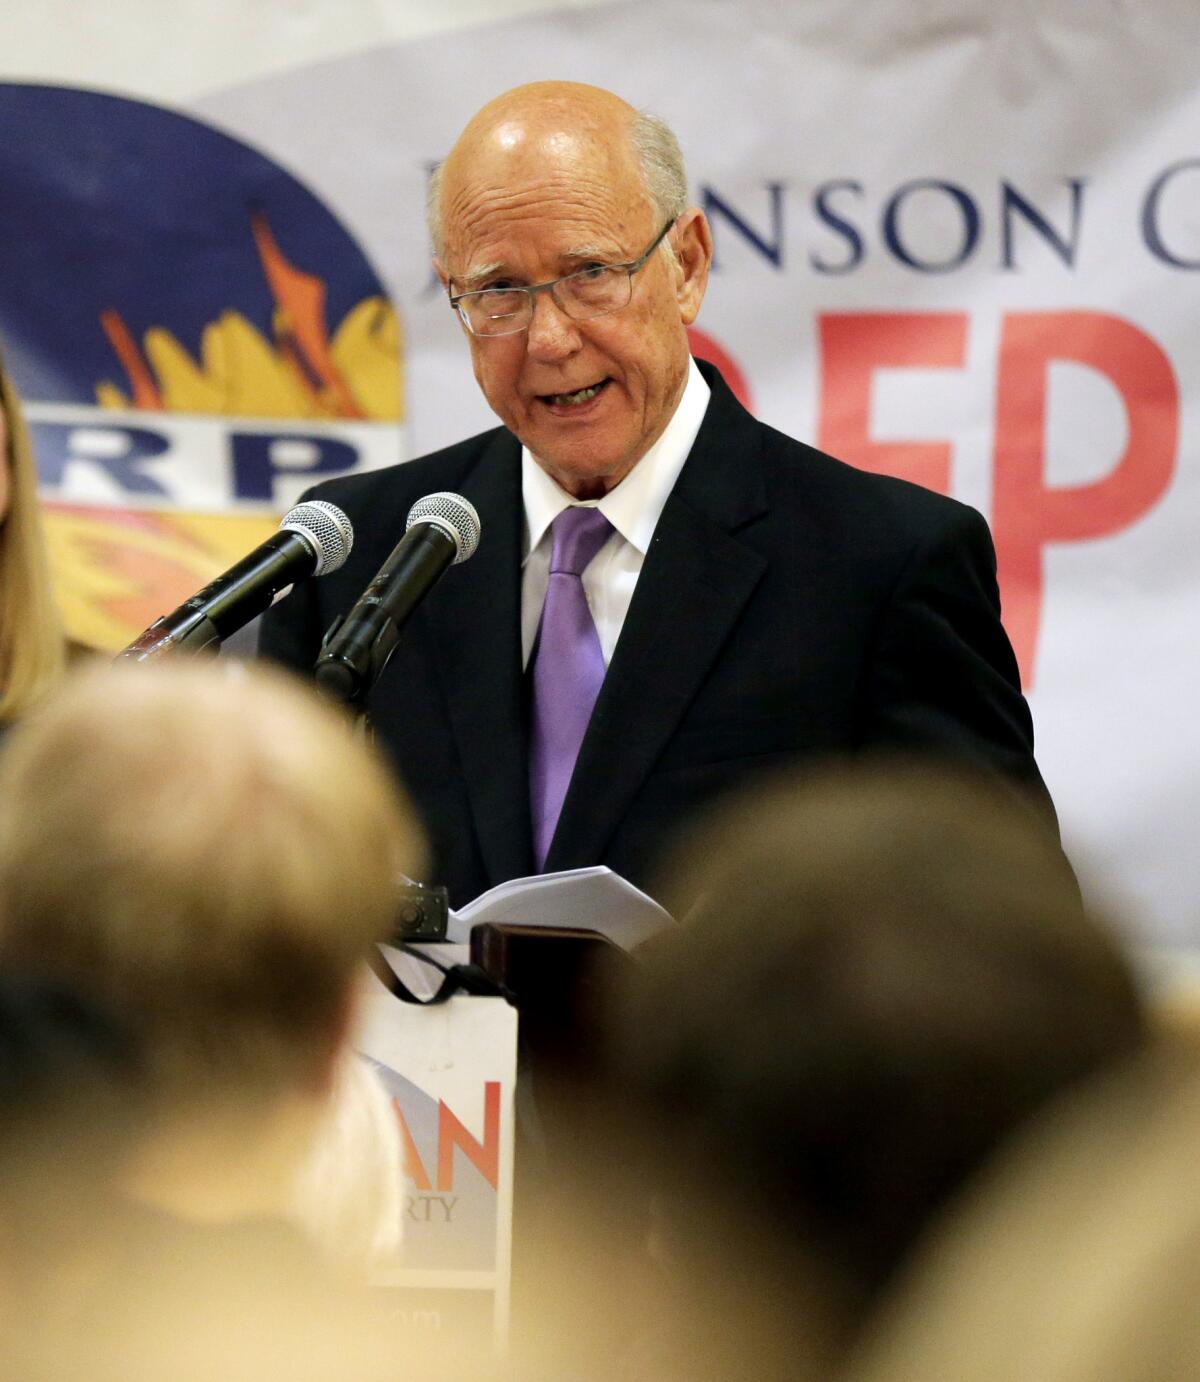 Suddenly faced with a one-on-one race against a wealthy maverick, Kansas Sen. Pat Roberts is looking more vulnerable. The race complicates GOP hopes of taking over the Senate in November.